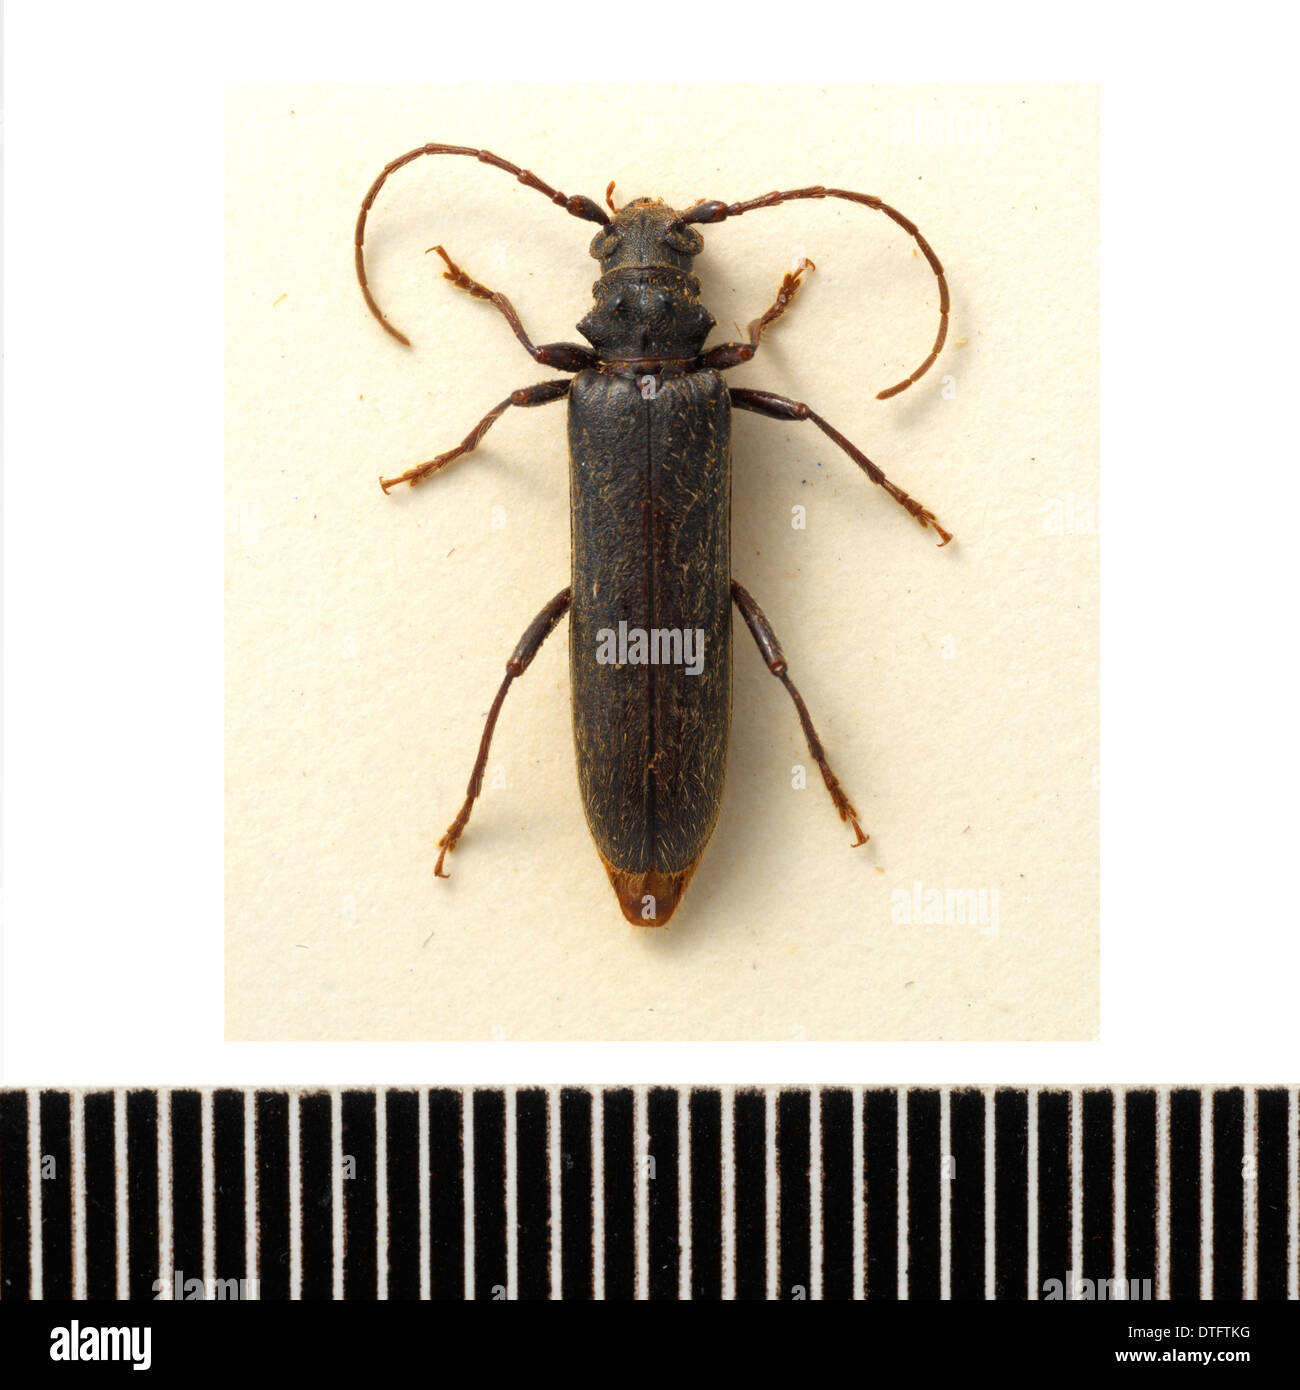 Ambeodontus tristis, two-toothed longhorn. Stock Photo